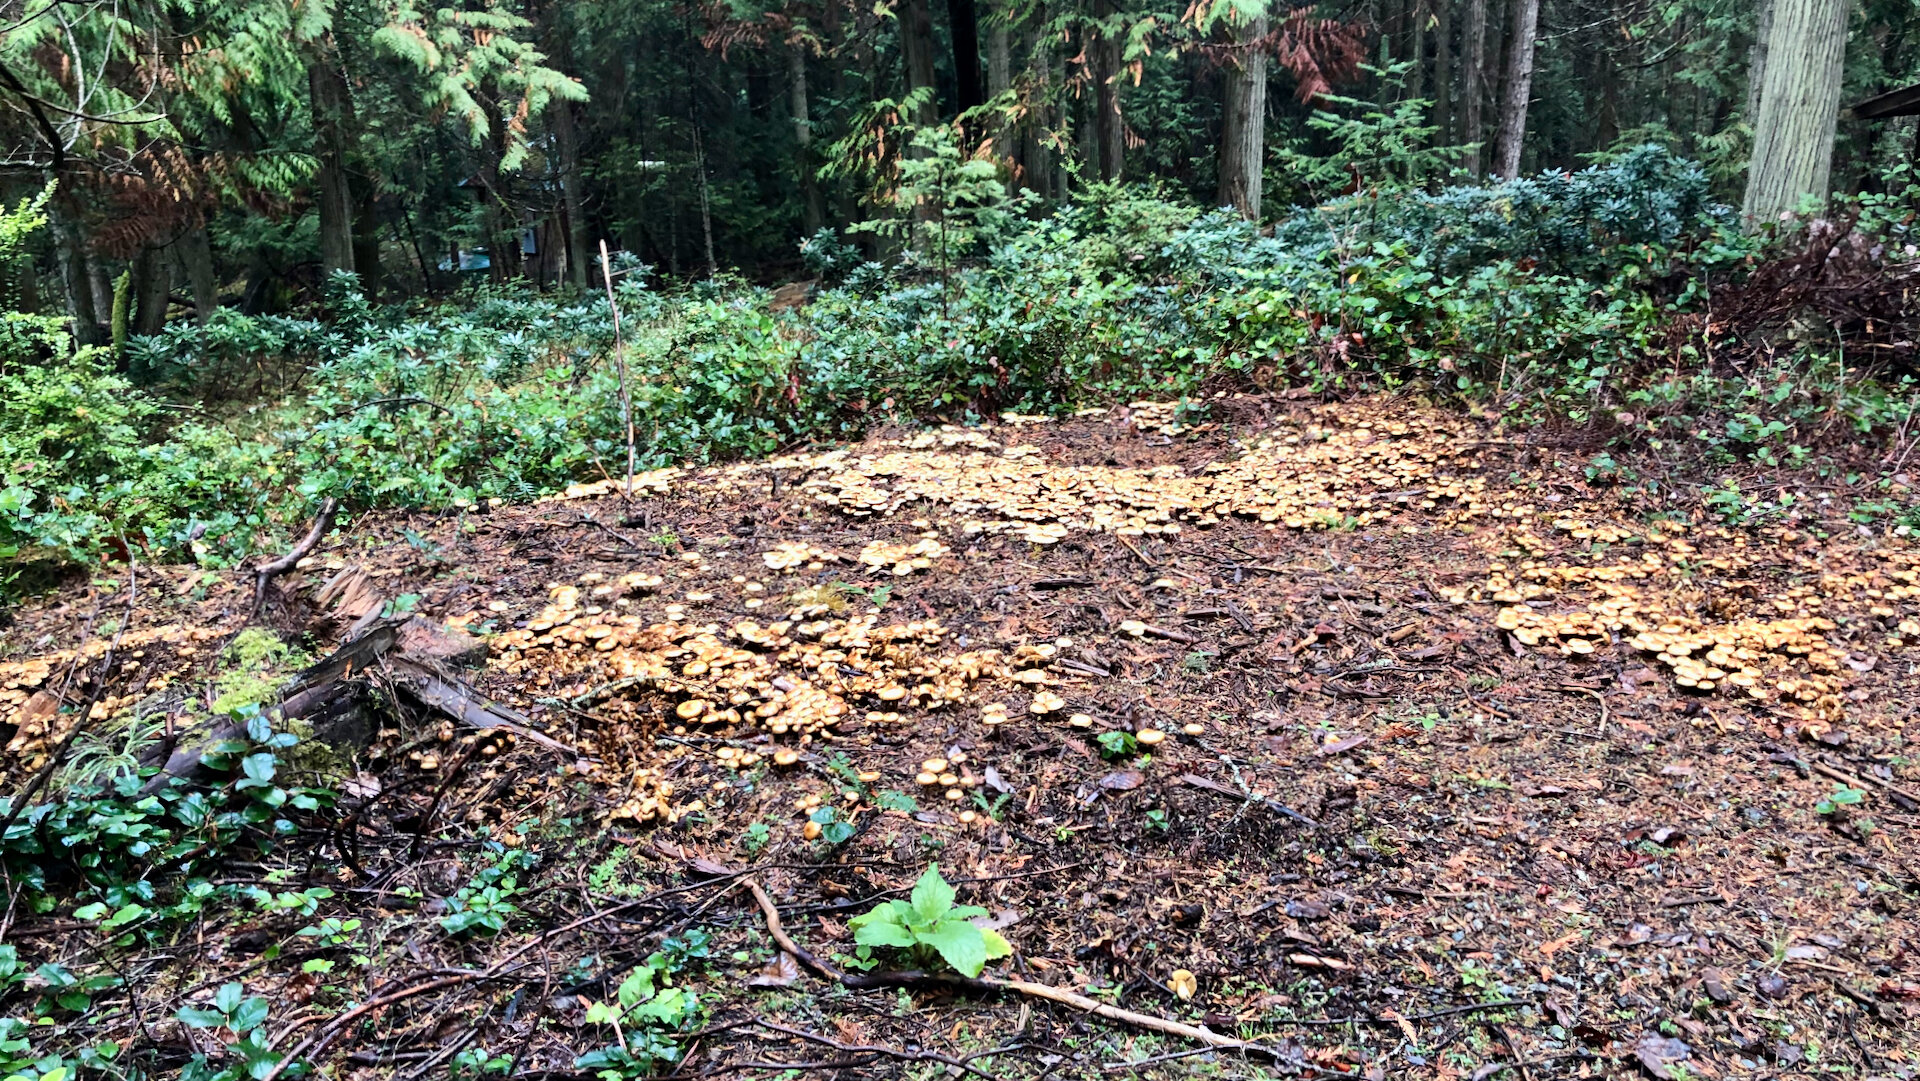  The huge mushroom patch was still going strong. 